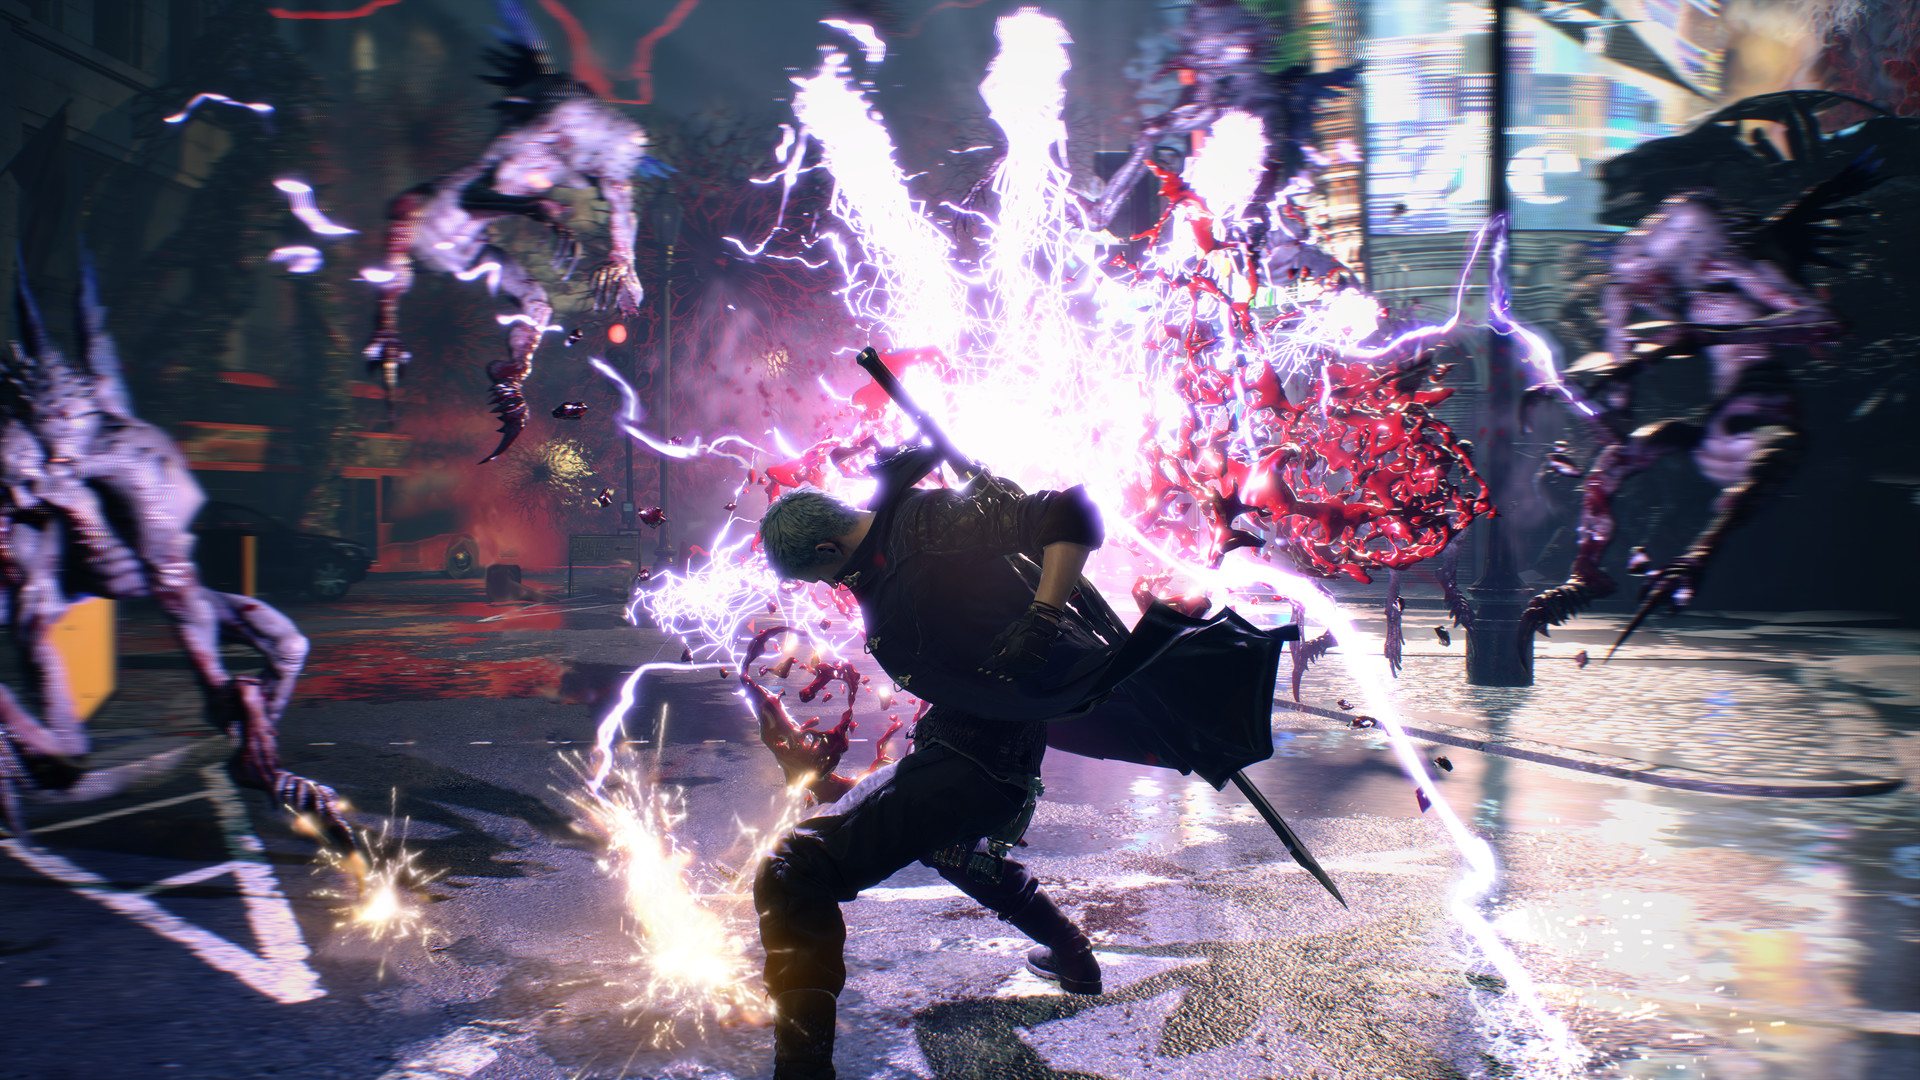 Devil May Cry 5 + Playable Character: Vergil DLC Steam CD Key [USD 7.66]